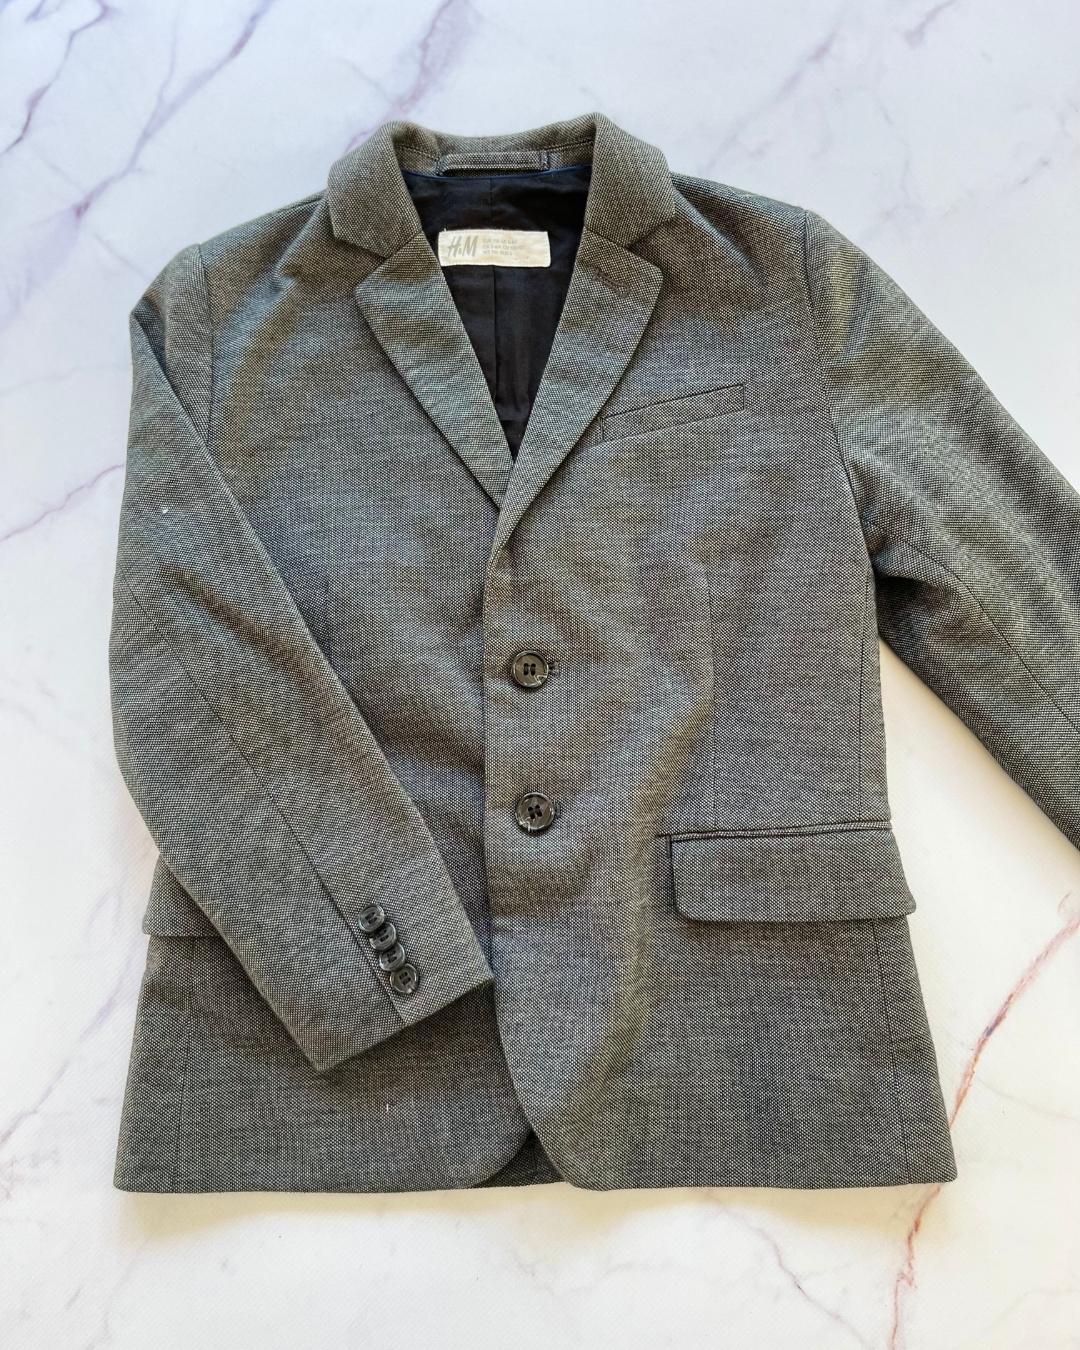 H&M grey formal jacket 5/6Y - Nearly New Kids